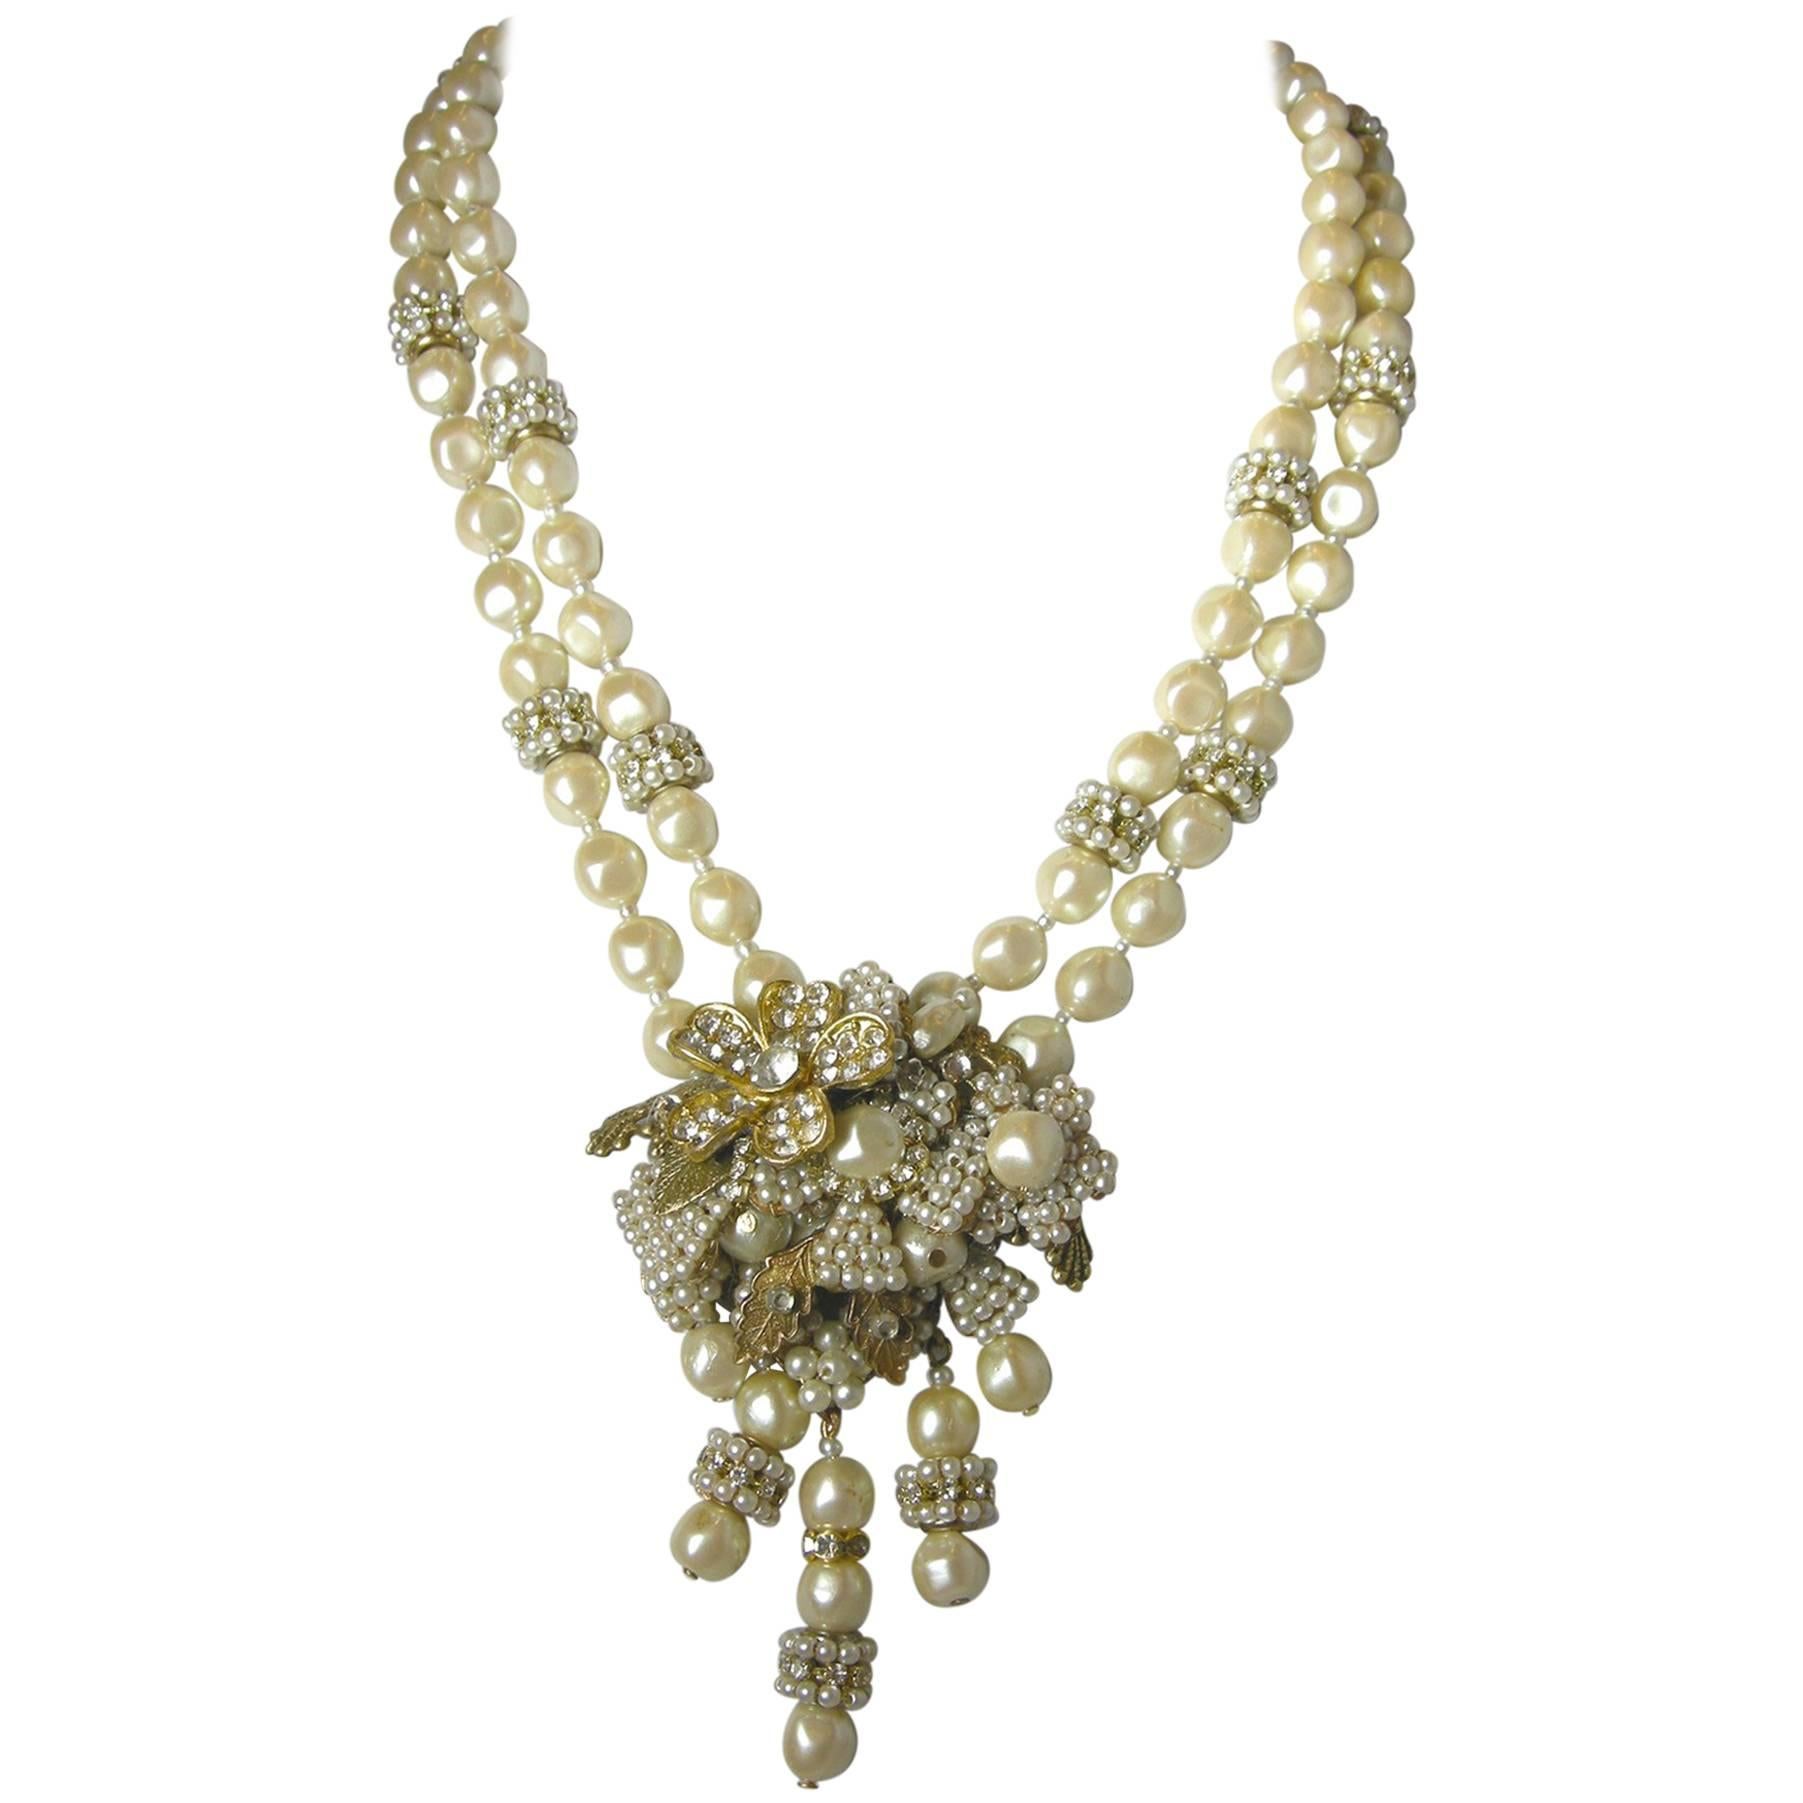 Miriam Haskell Vintage Faux Pearl Double Strand Floral Drop Necklace